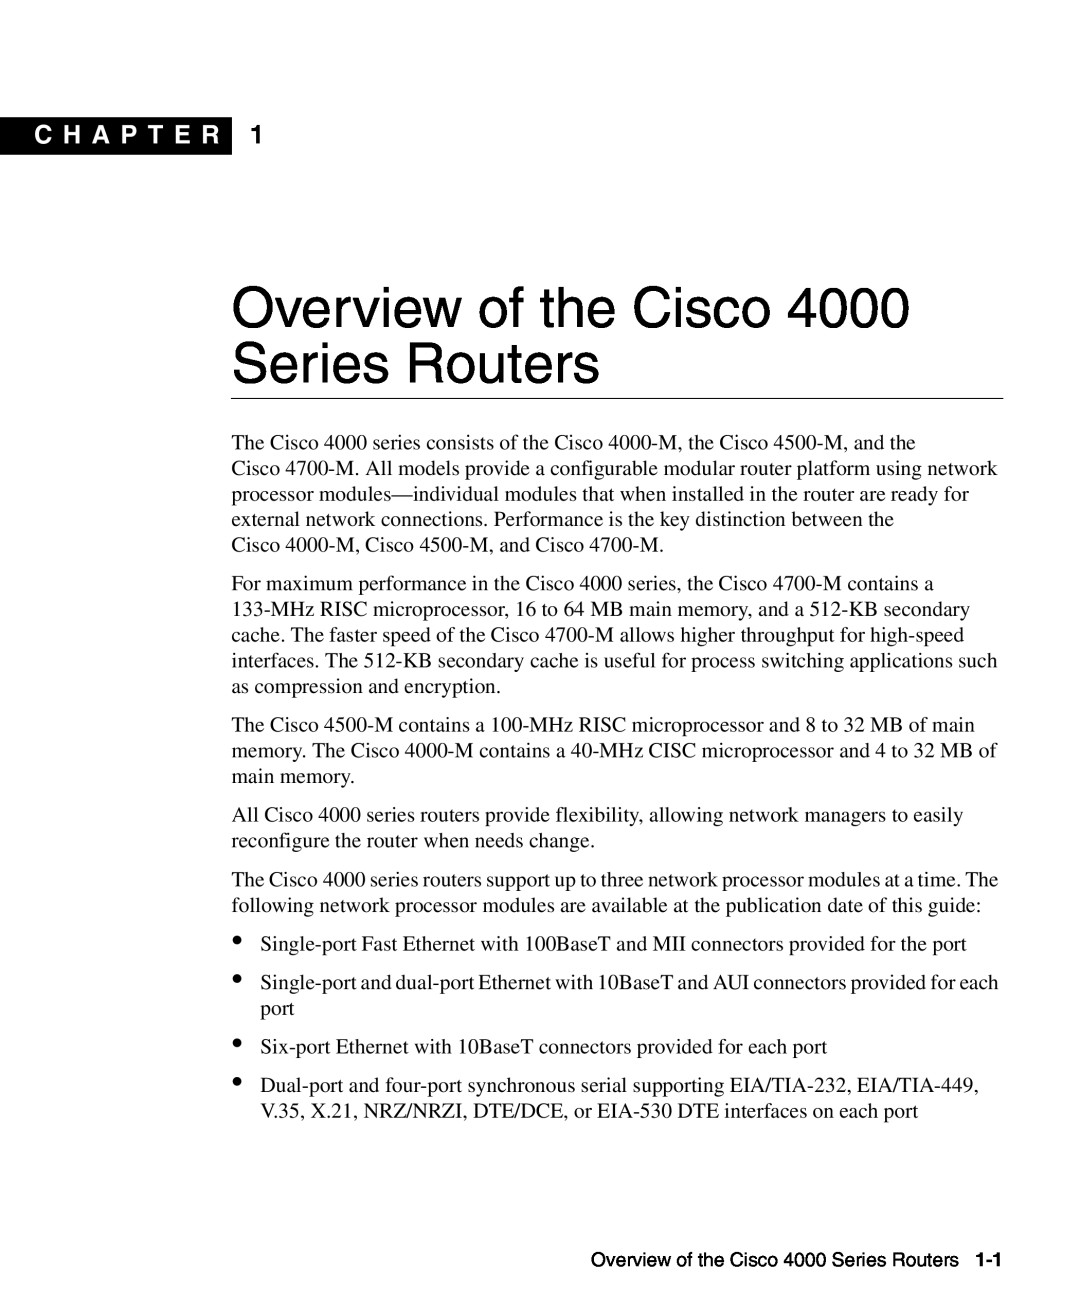 Cisco Systems specifications Module Overview and Specifications, Catalyst 4000 Series Switches, C H A P T E R 